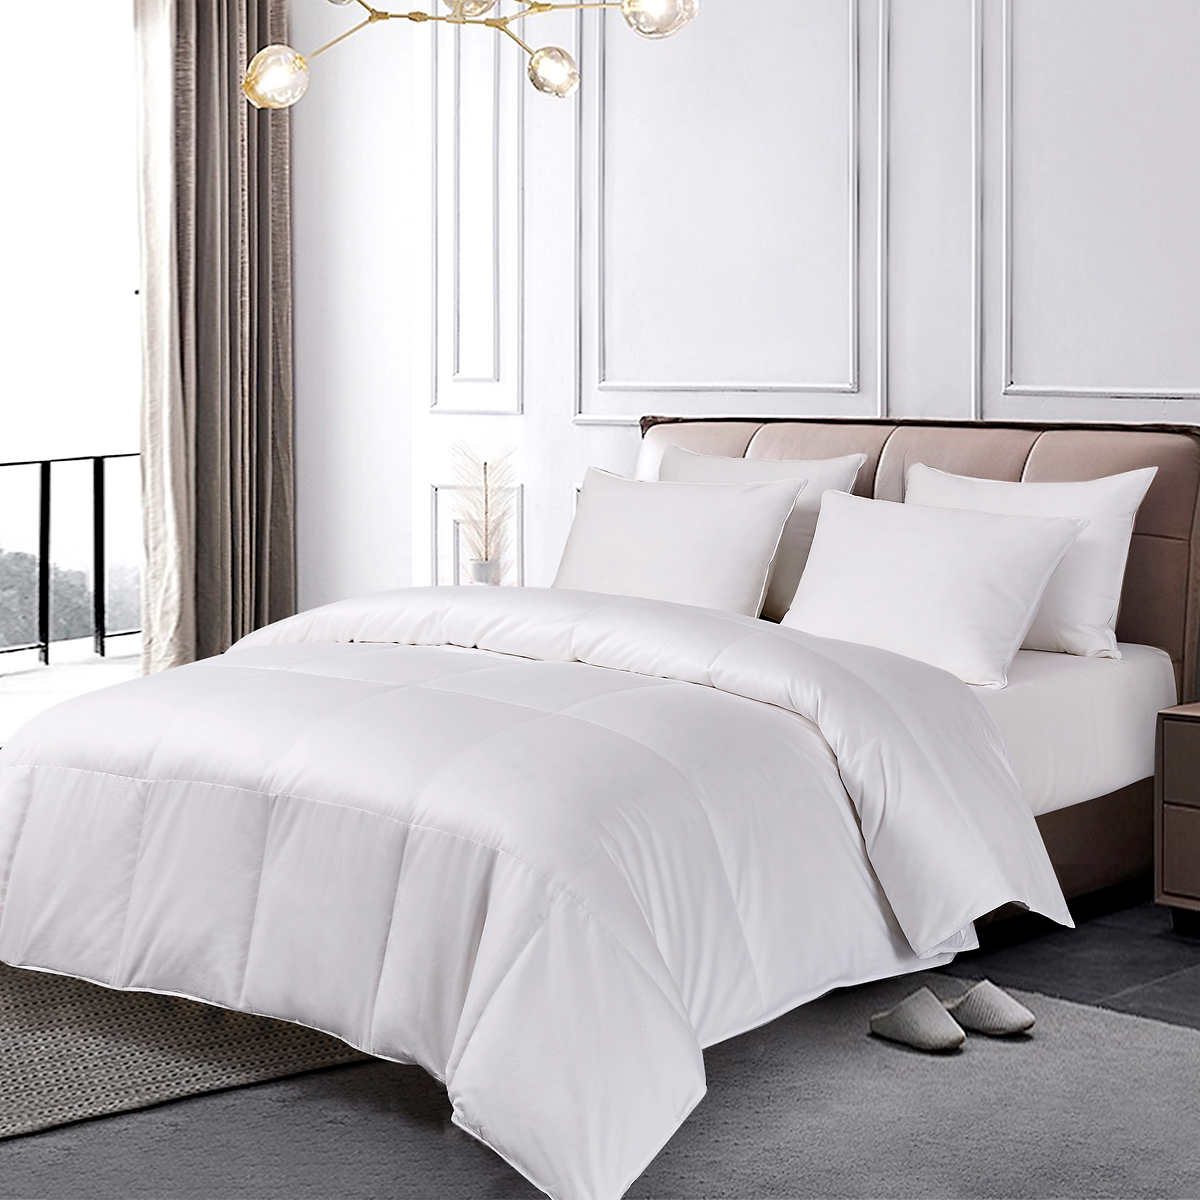 Royal Luxe White Down Comforter Costco, How To Tie A Duvet Cover To A Down Comforter